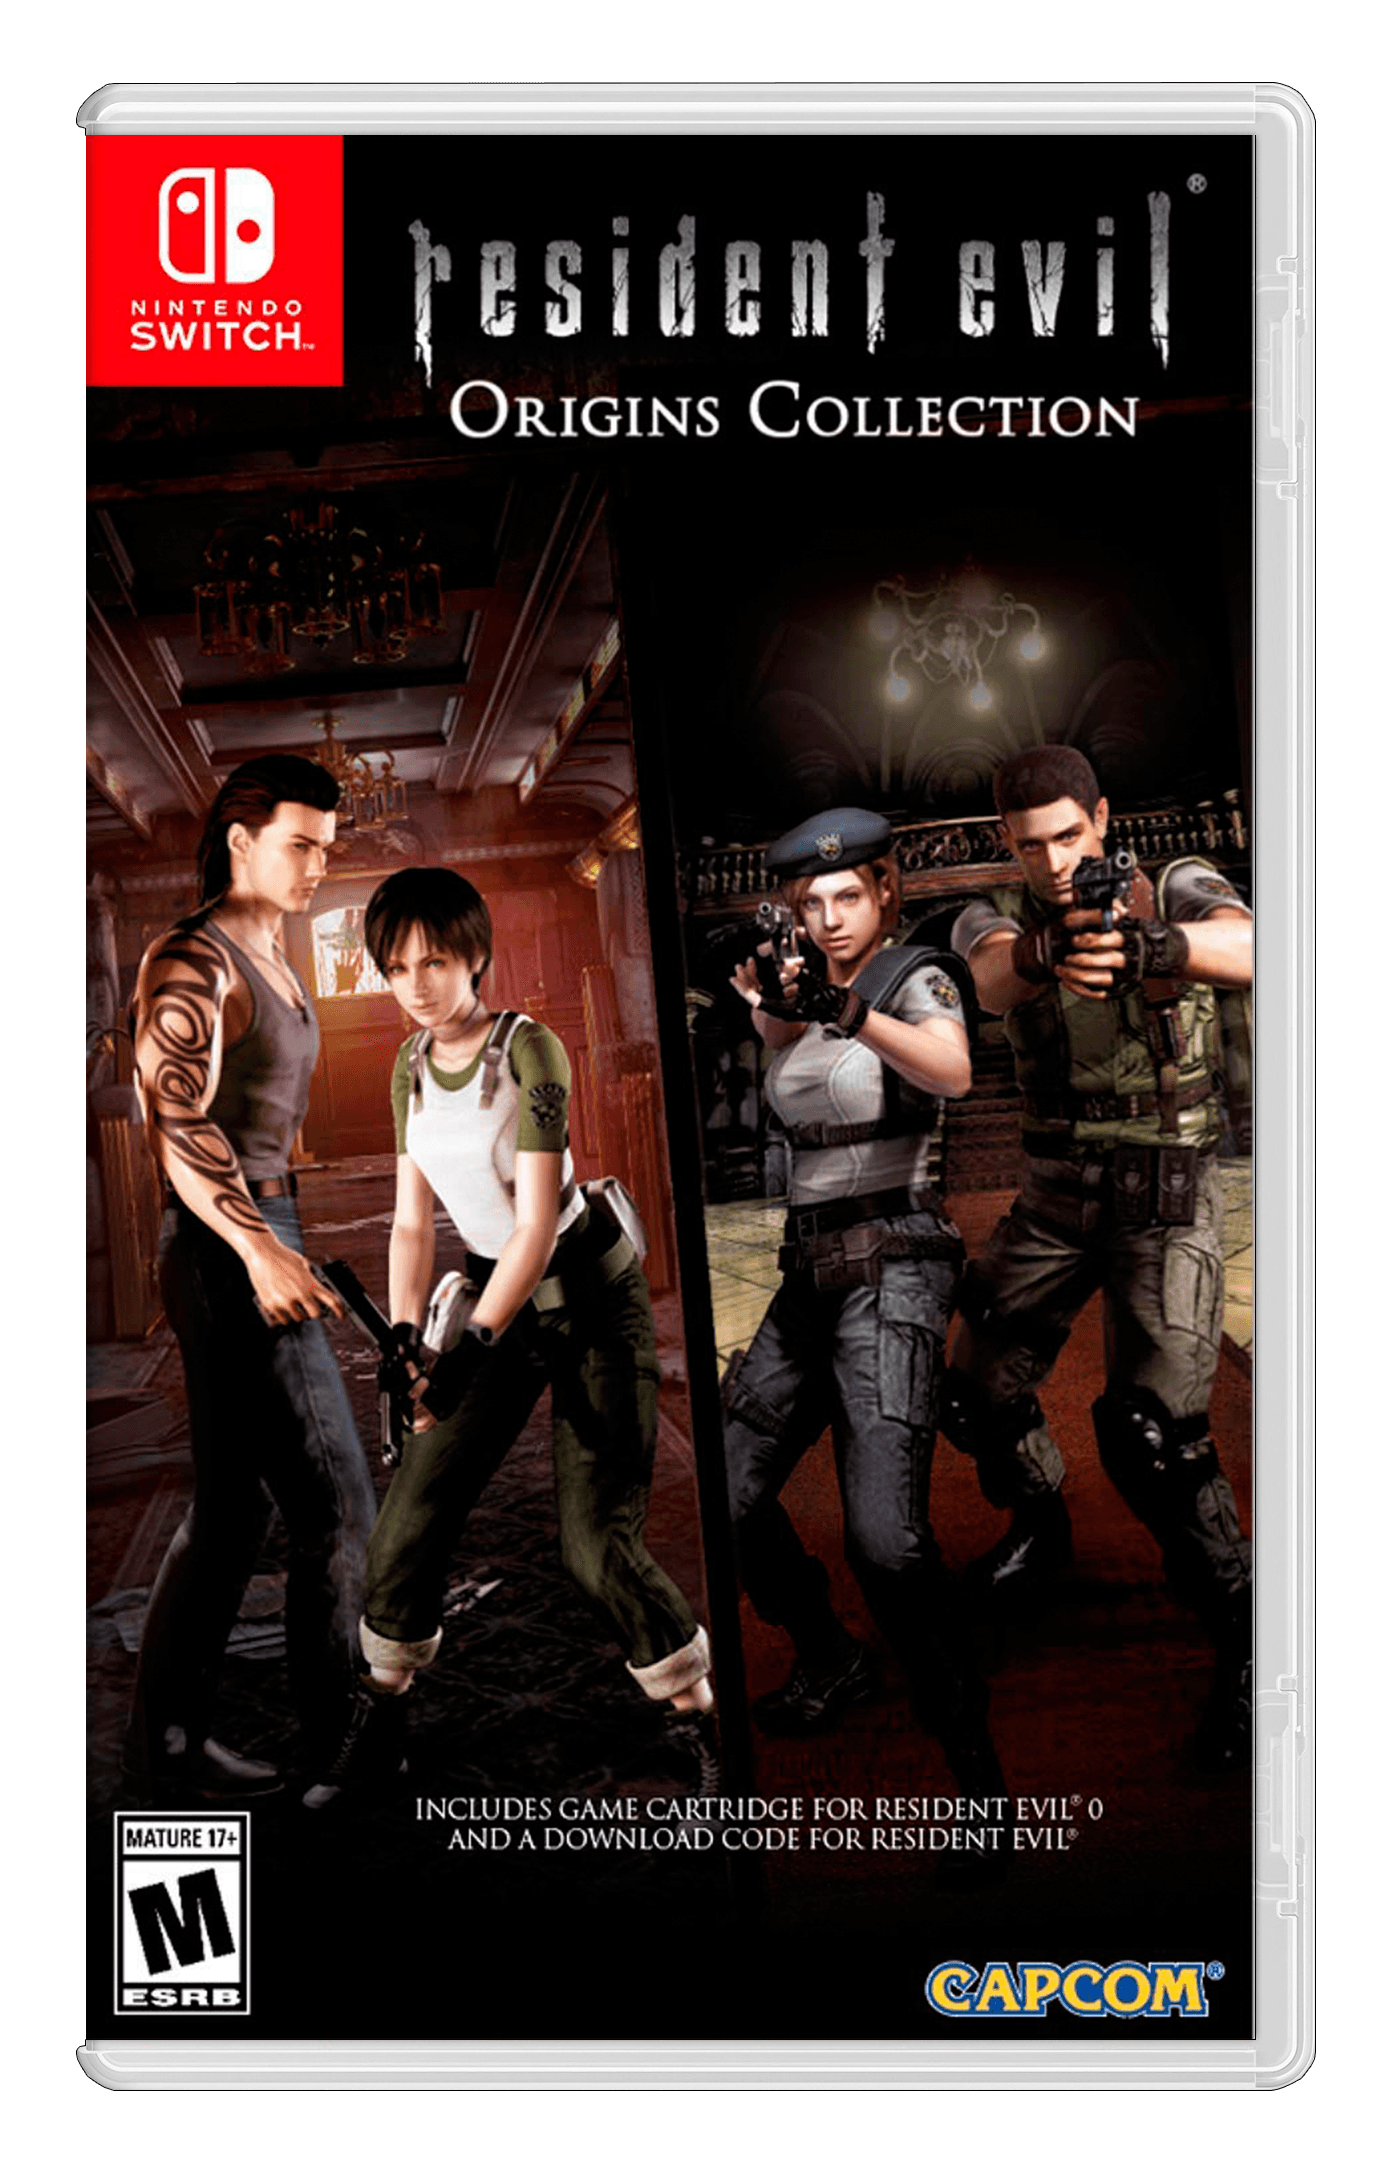 Juego Nintendo Switch Resident Evil Origins Collection